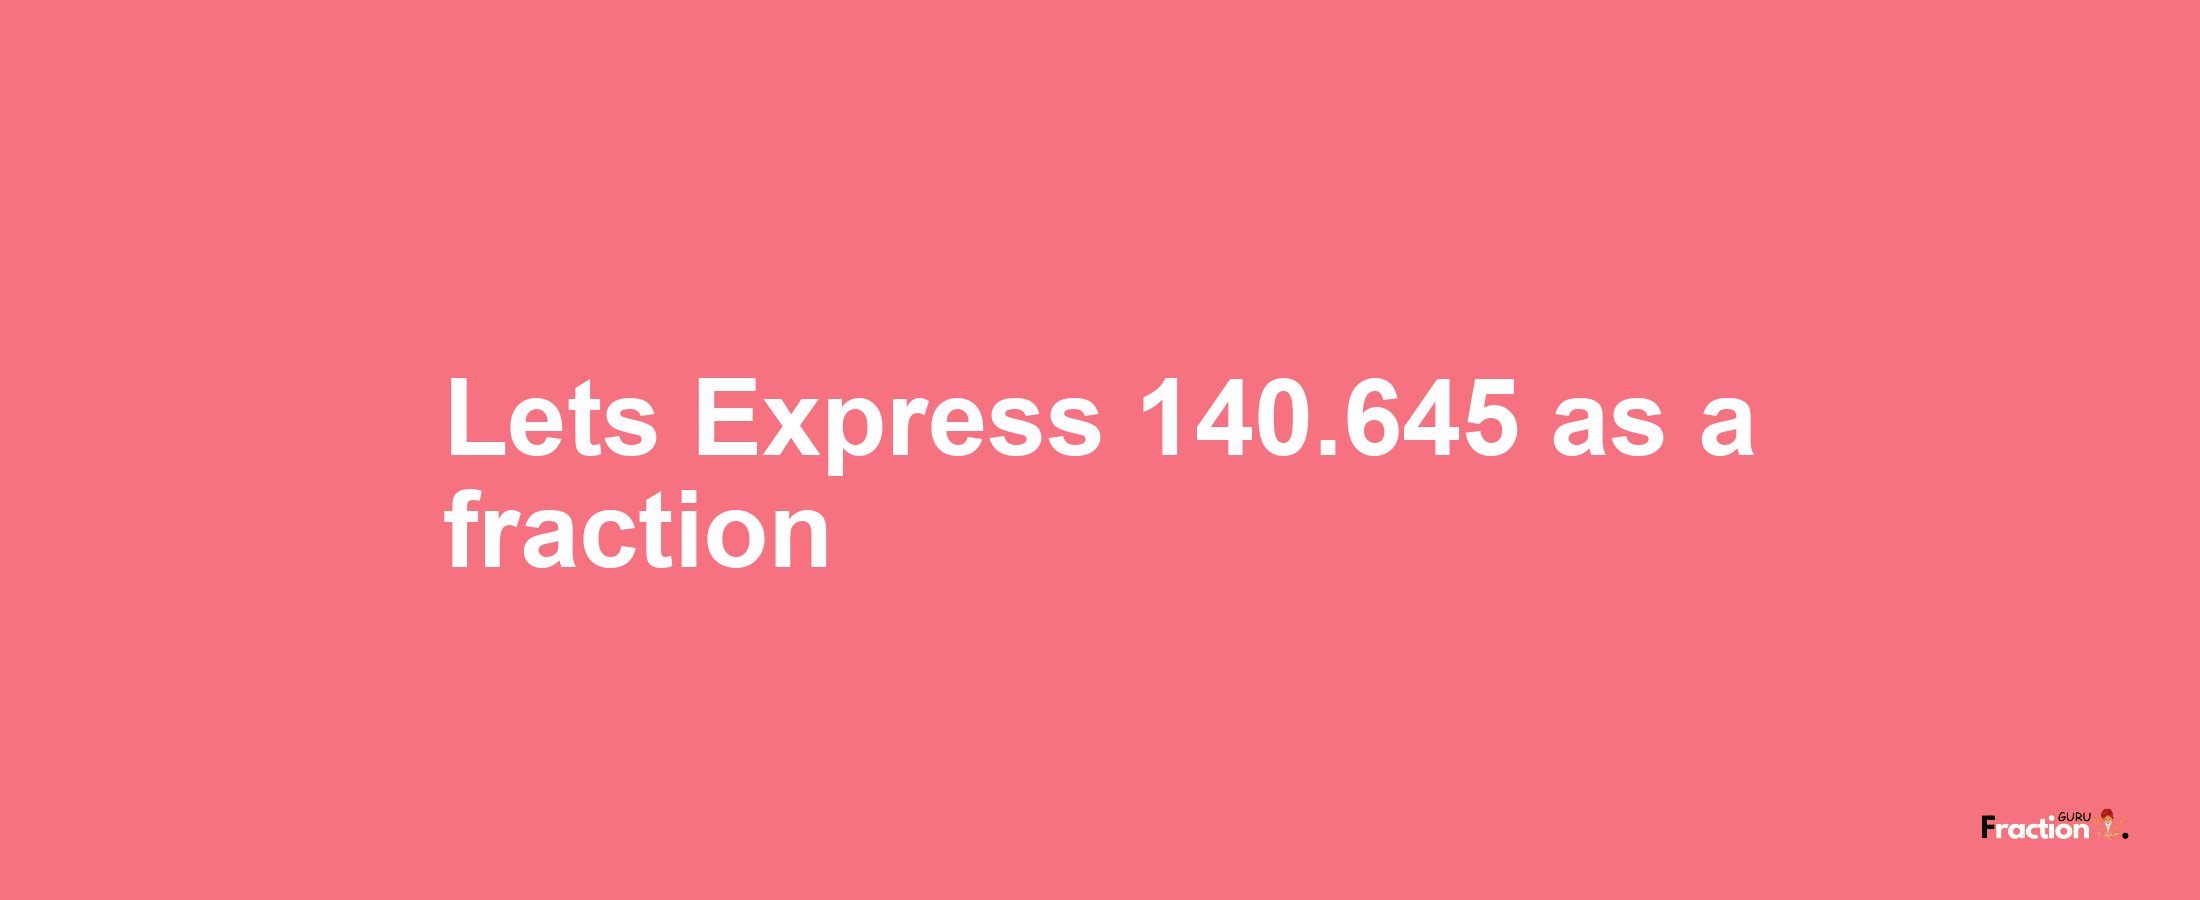 Lets Express 140.645 as afraction